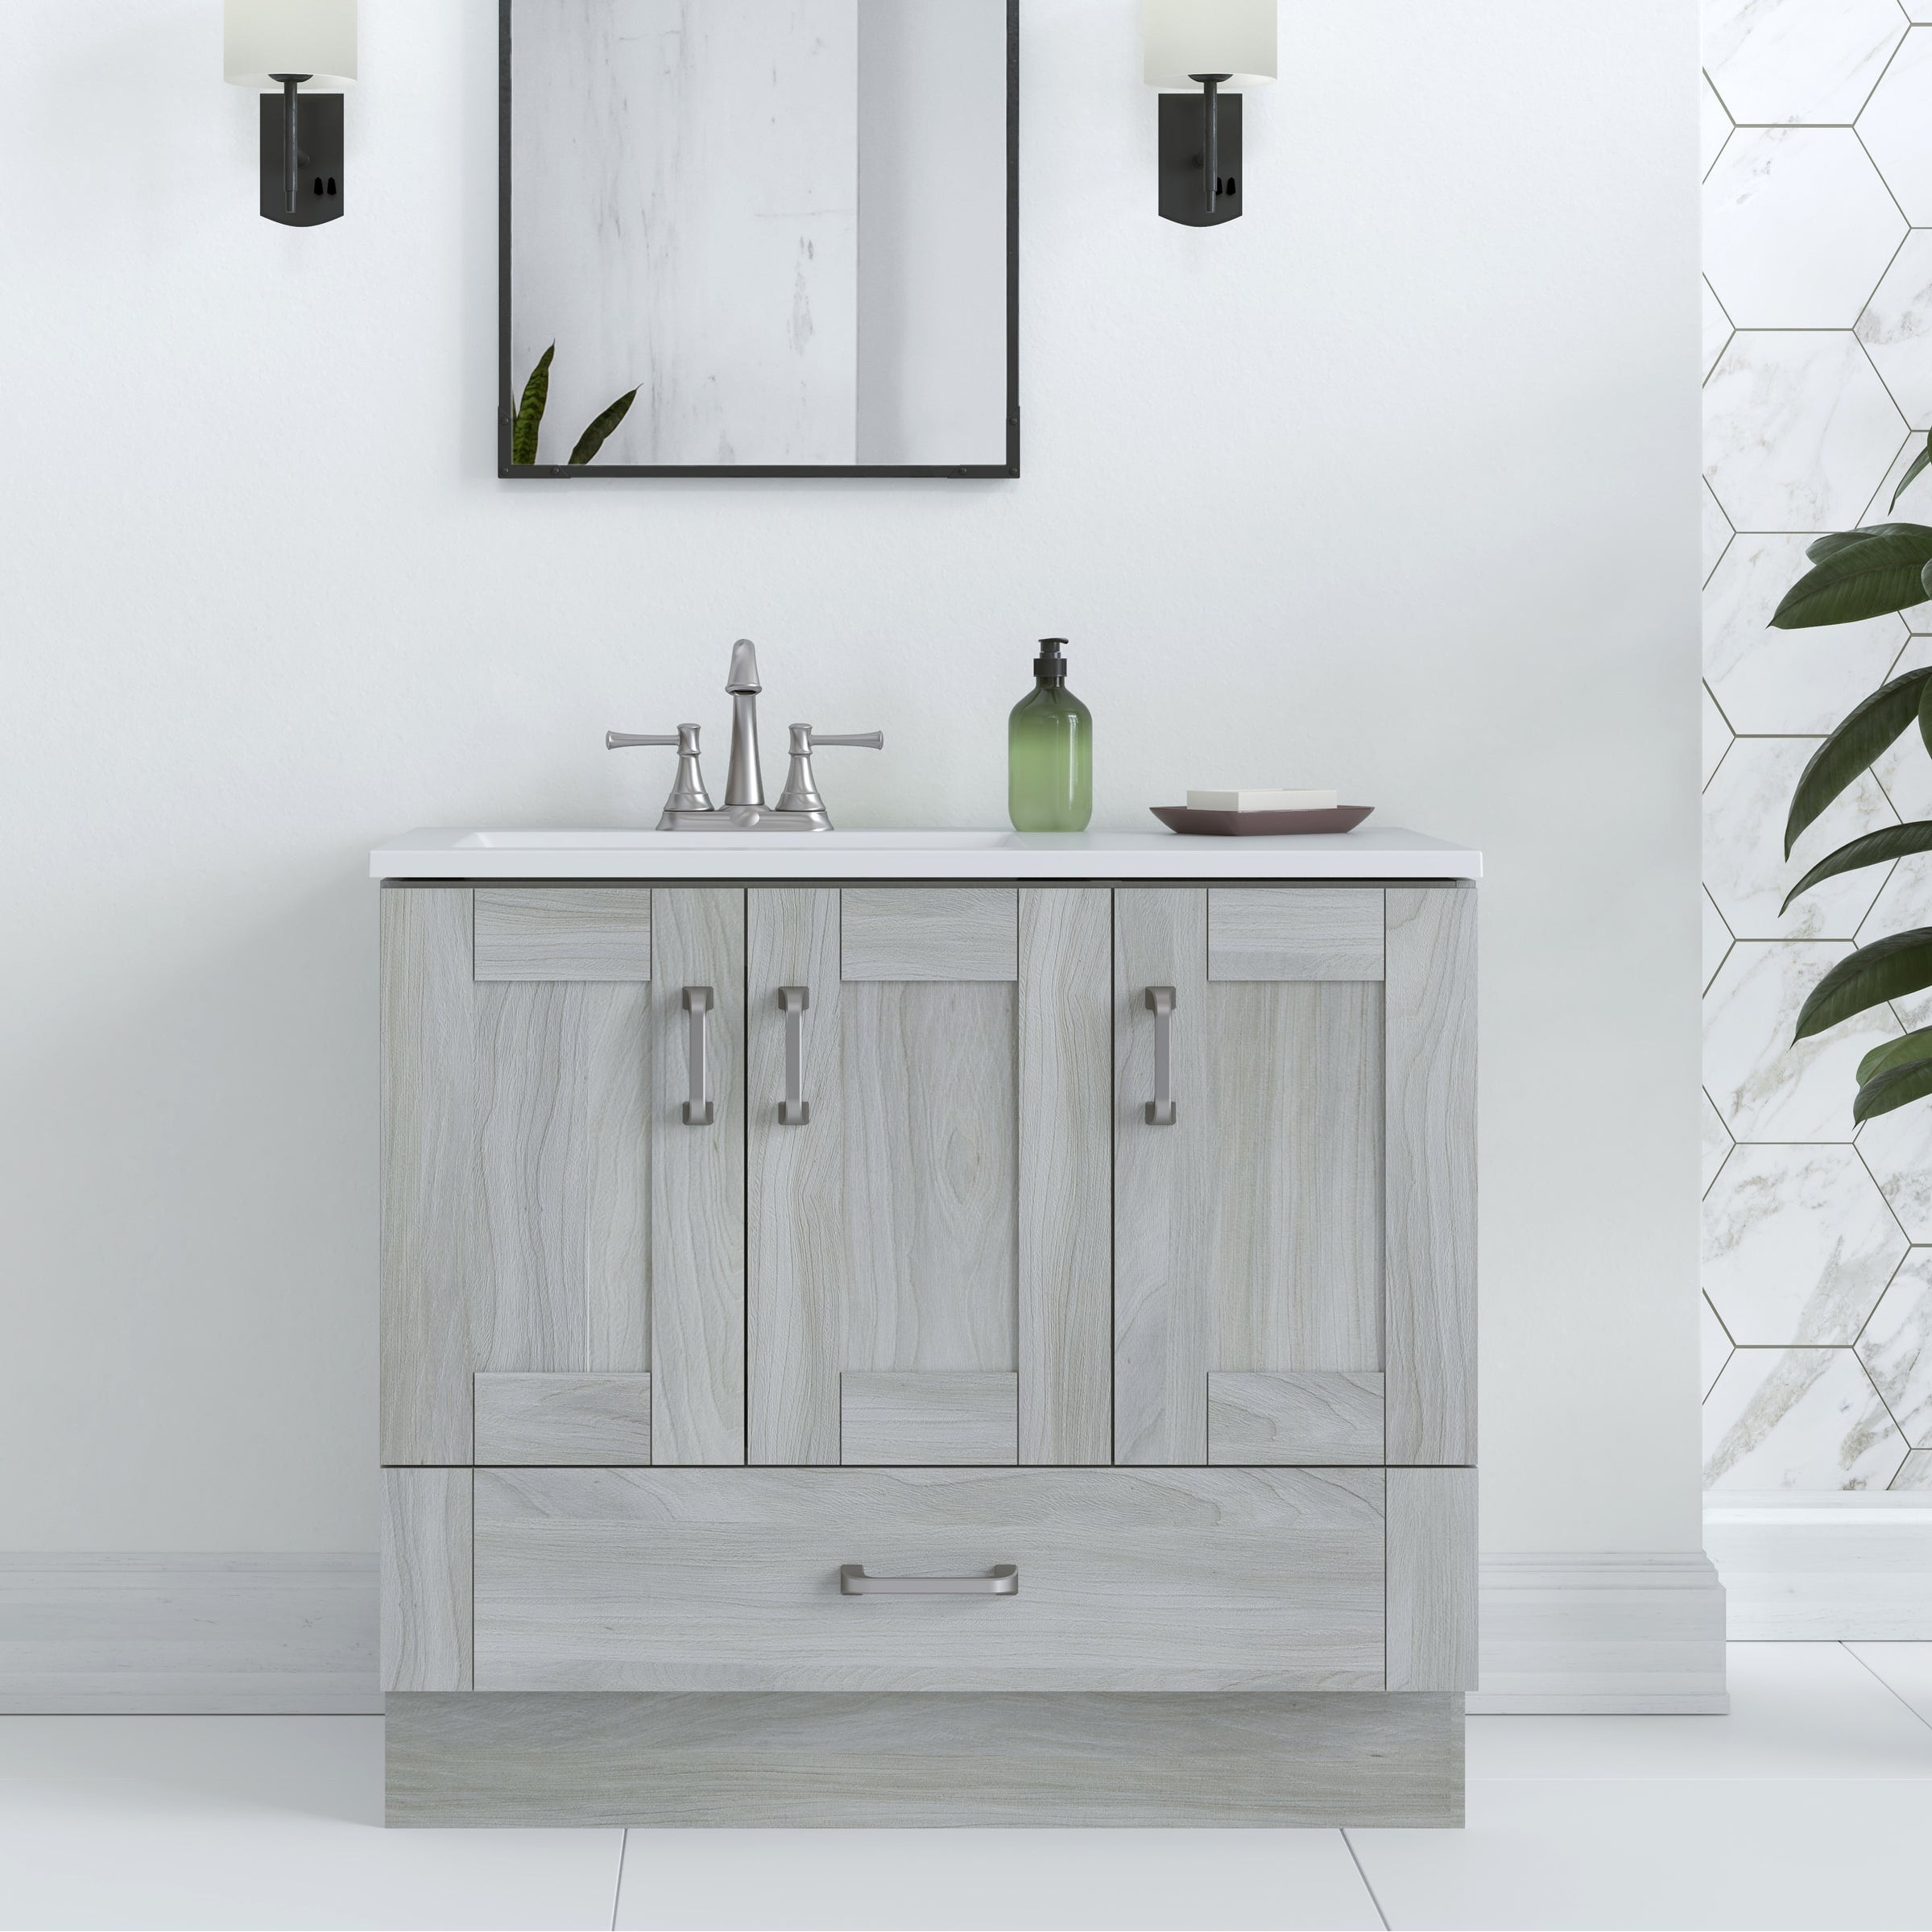 https://ak1.ostkcdn.com/images/products/is/images/direct/57b991a0ec4bd8c11a0ef4fd74dd86b8c4d58ade/Spring-Mill-Cabinets-36%22-Noelani-Bathroom-Vanity-With-2-Cabinets%2C-2-Drawers%2C-and-White-Sink-Top.jpg